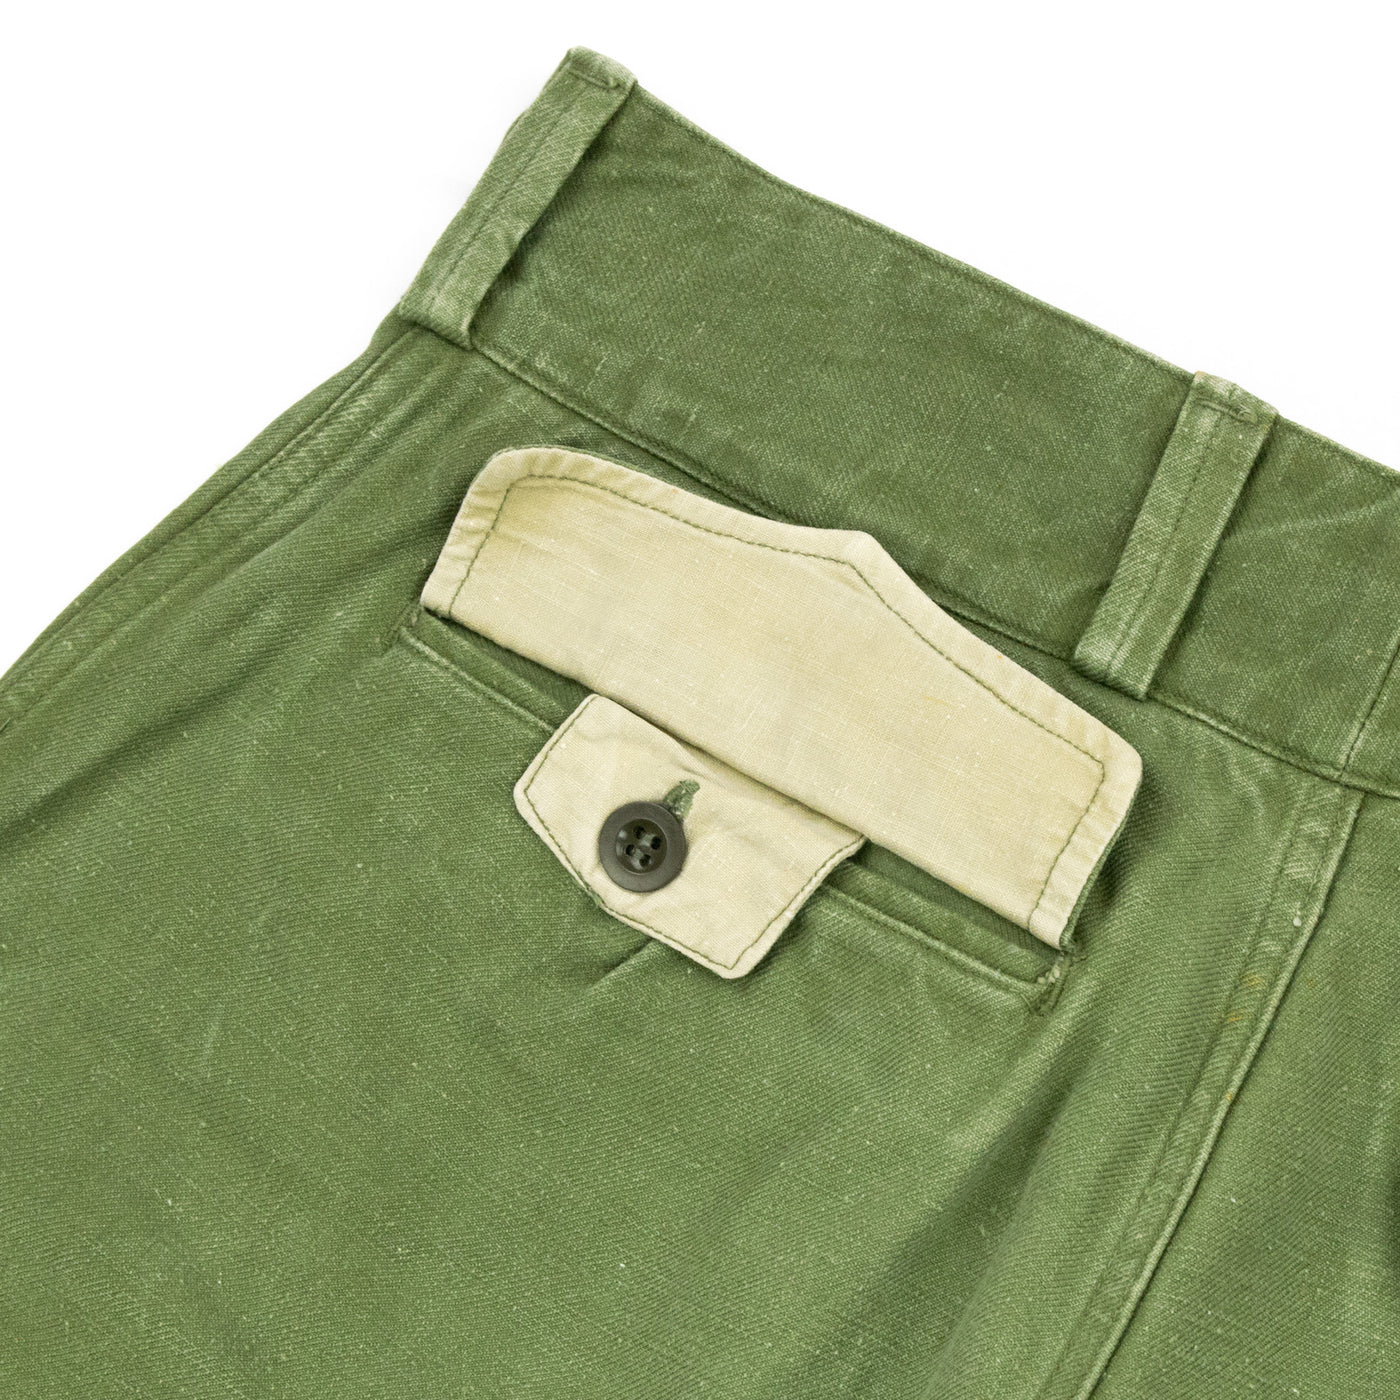 Vintage 1950s French Army M47 Military Cargo Trousers - 30